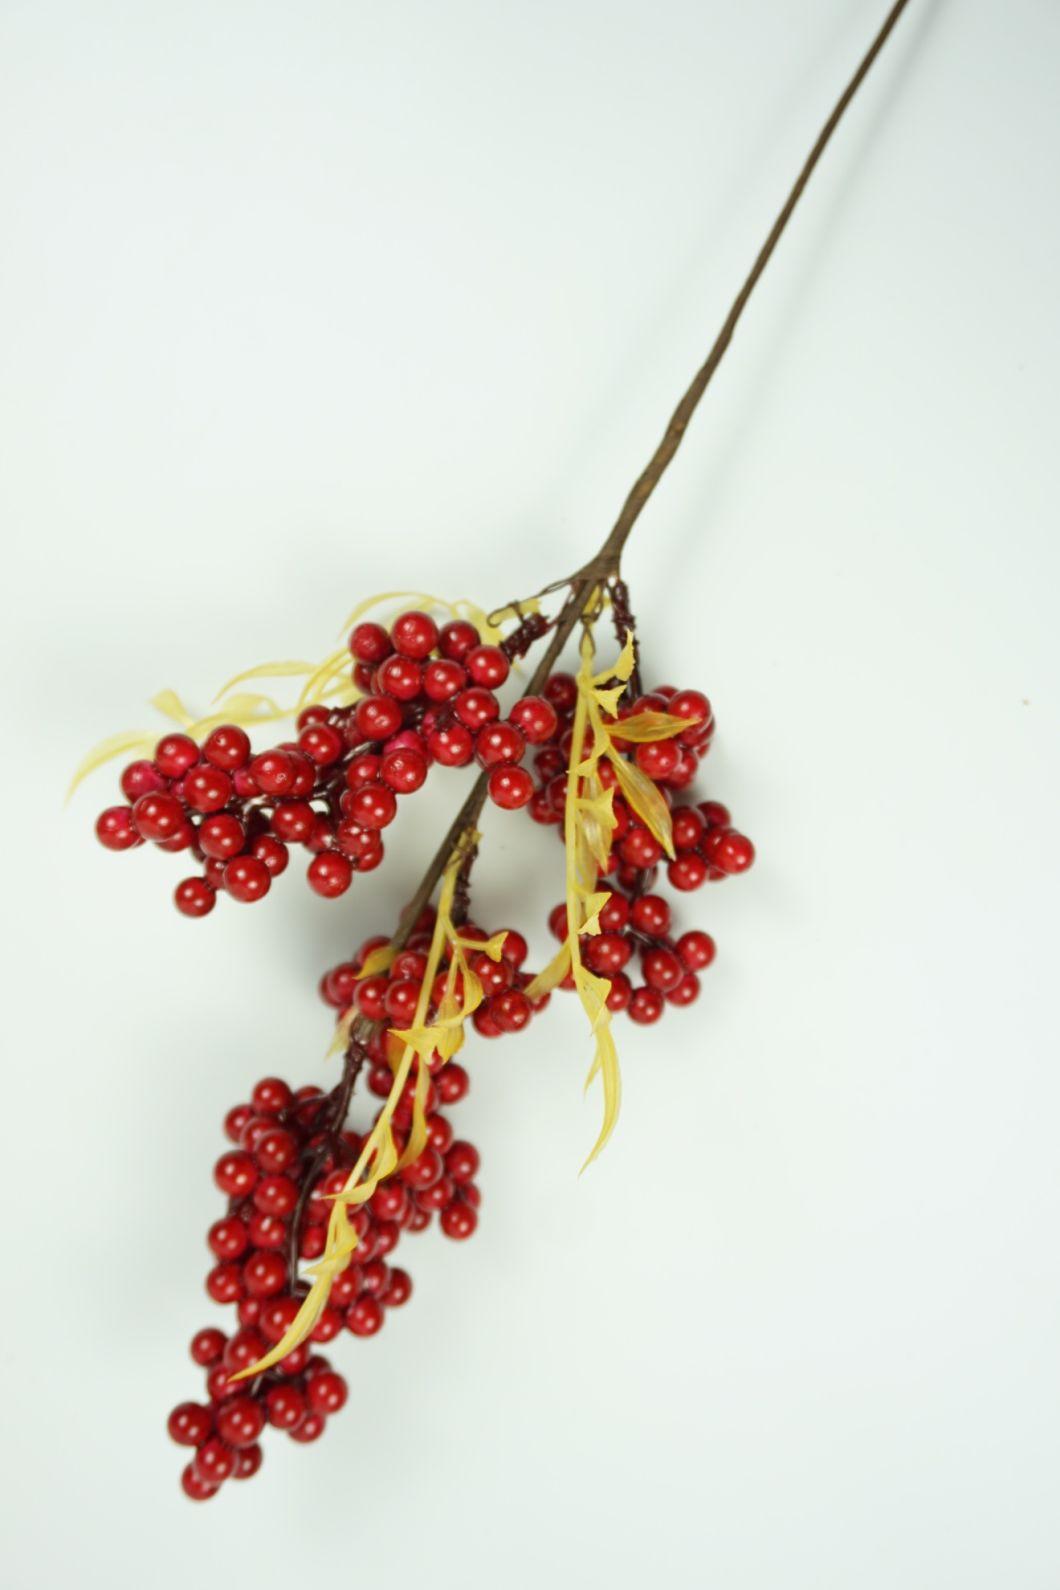 Christmas Berry Pick for Home Tree Decorations